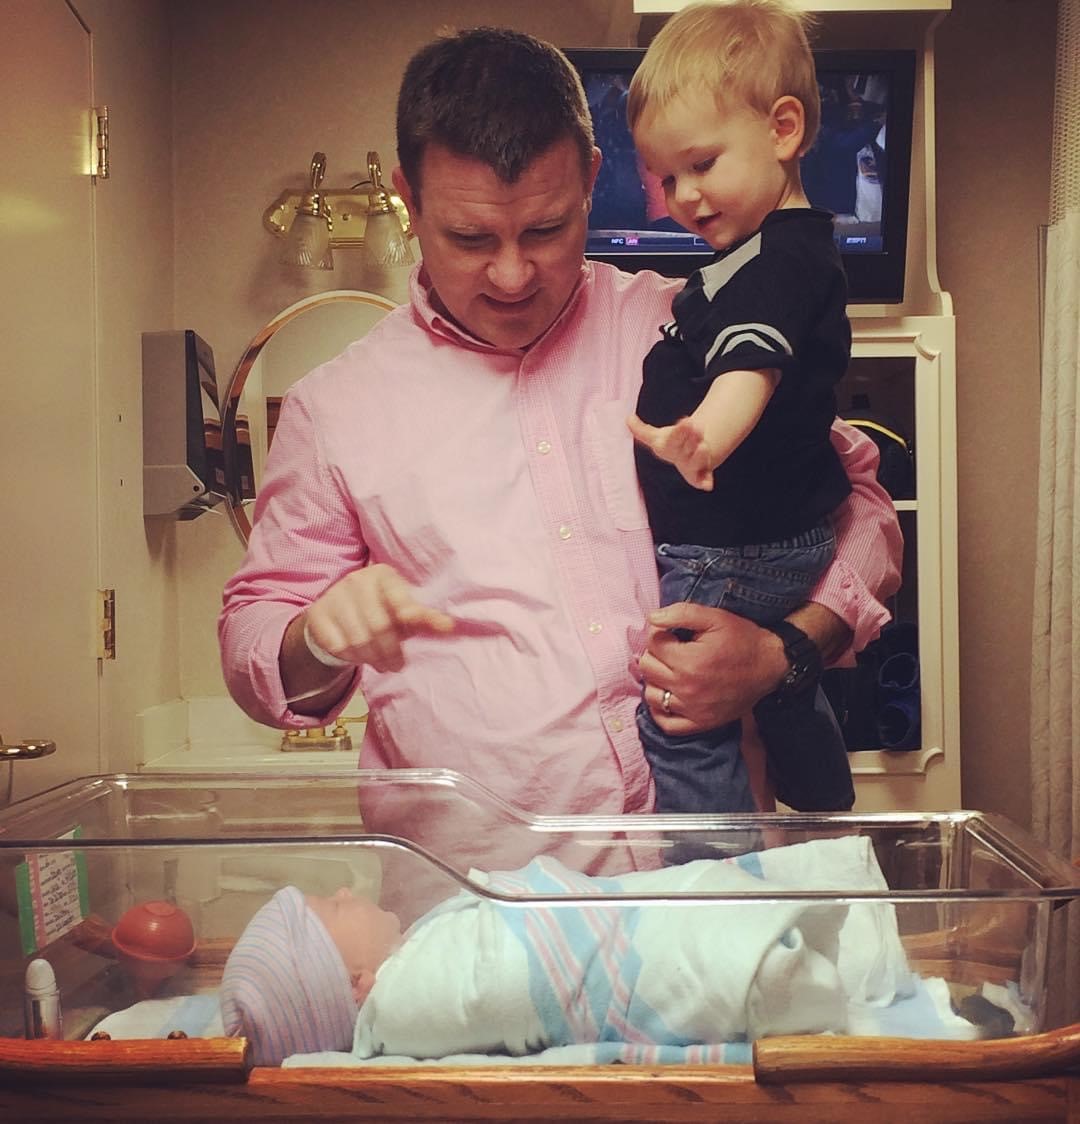 Father in pink shirt introduces young boy to his new baby sister in the hospital